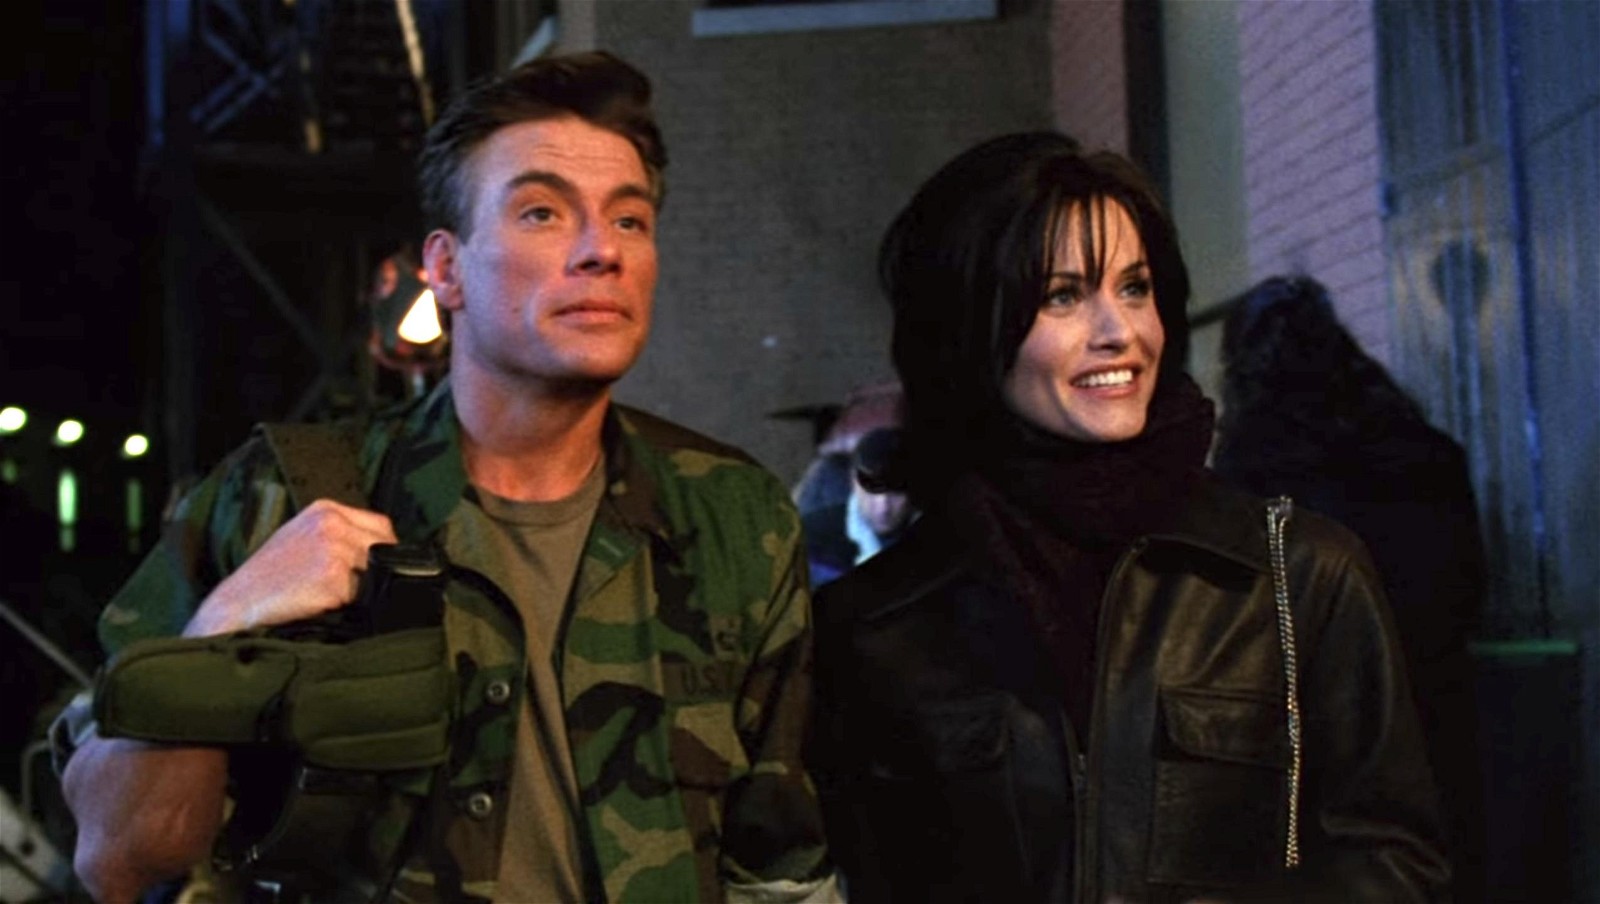 Jean-Claude Van Damme with Courteney Cox from a still in the Friends episode